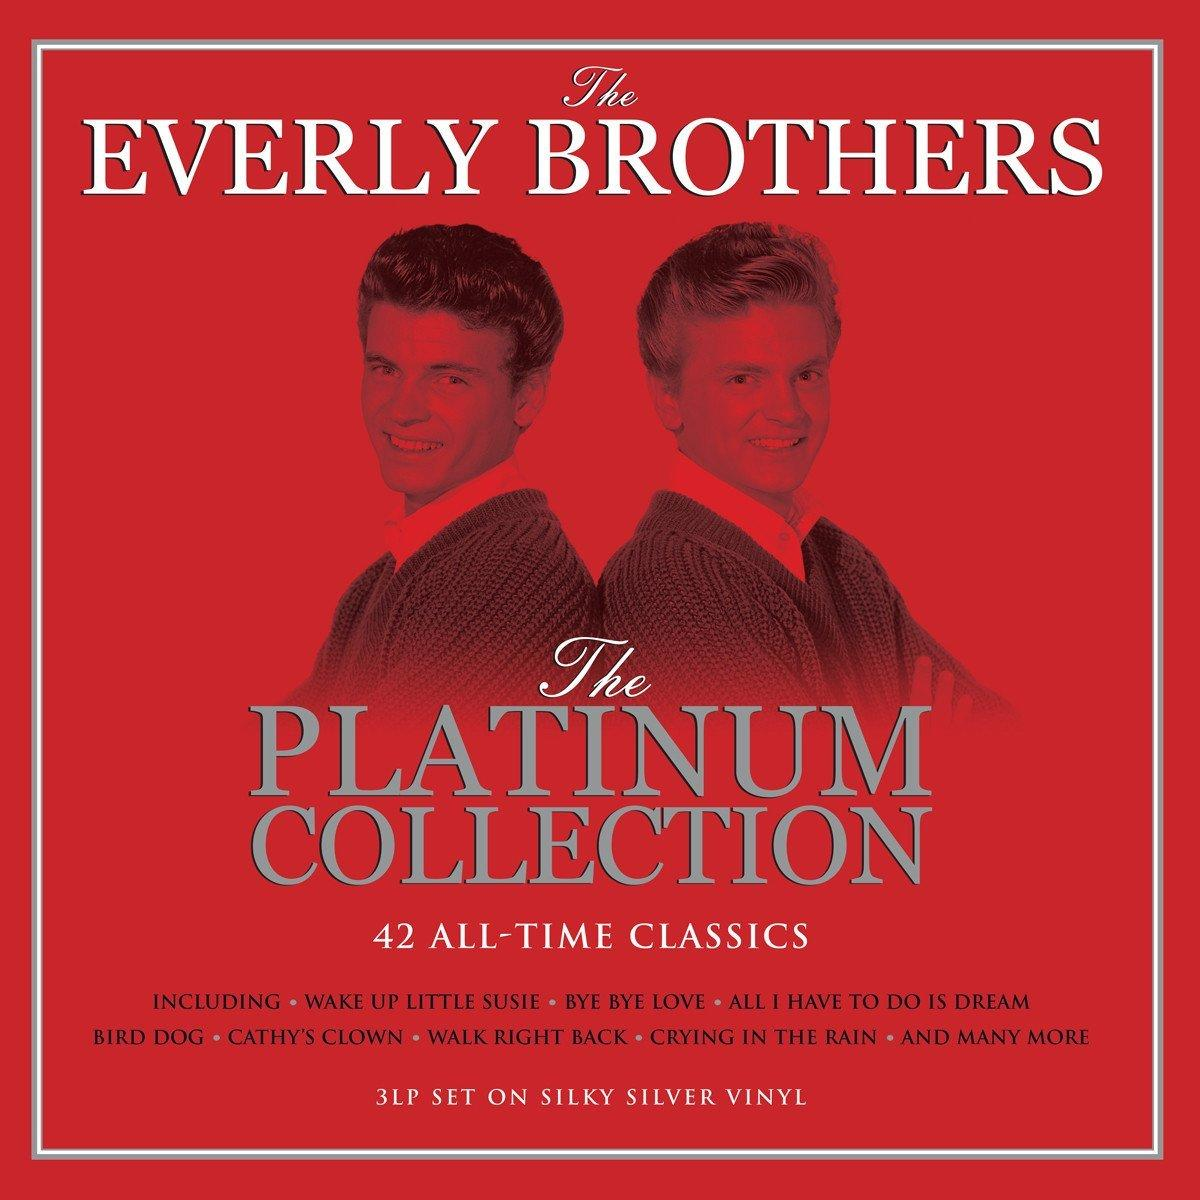 The Everly Vinyl) Collection (rotes - (Vinyl) Brothers Platinum 